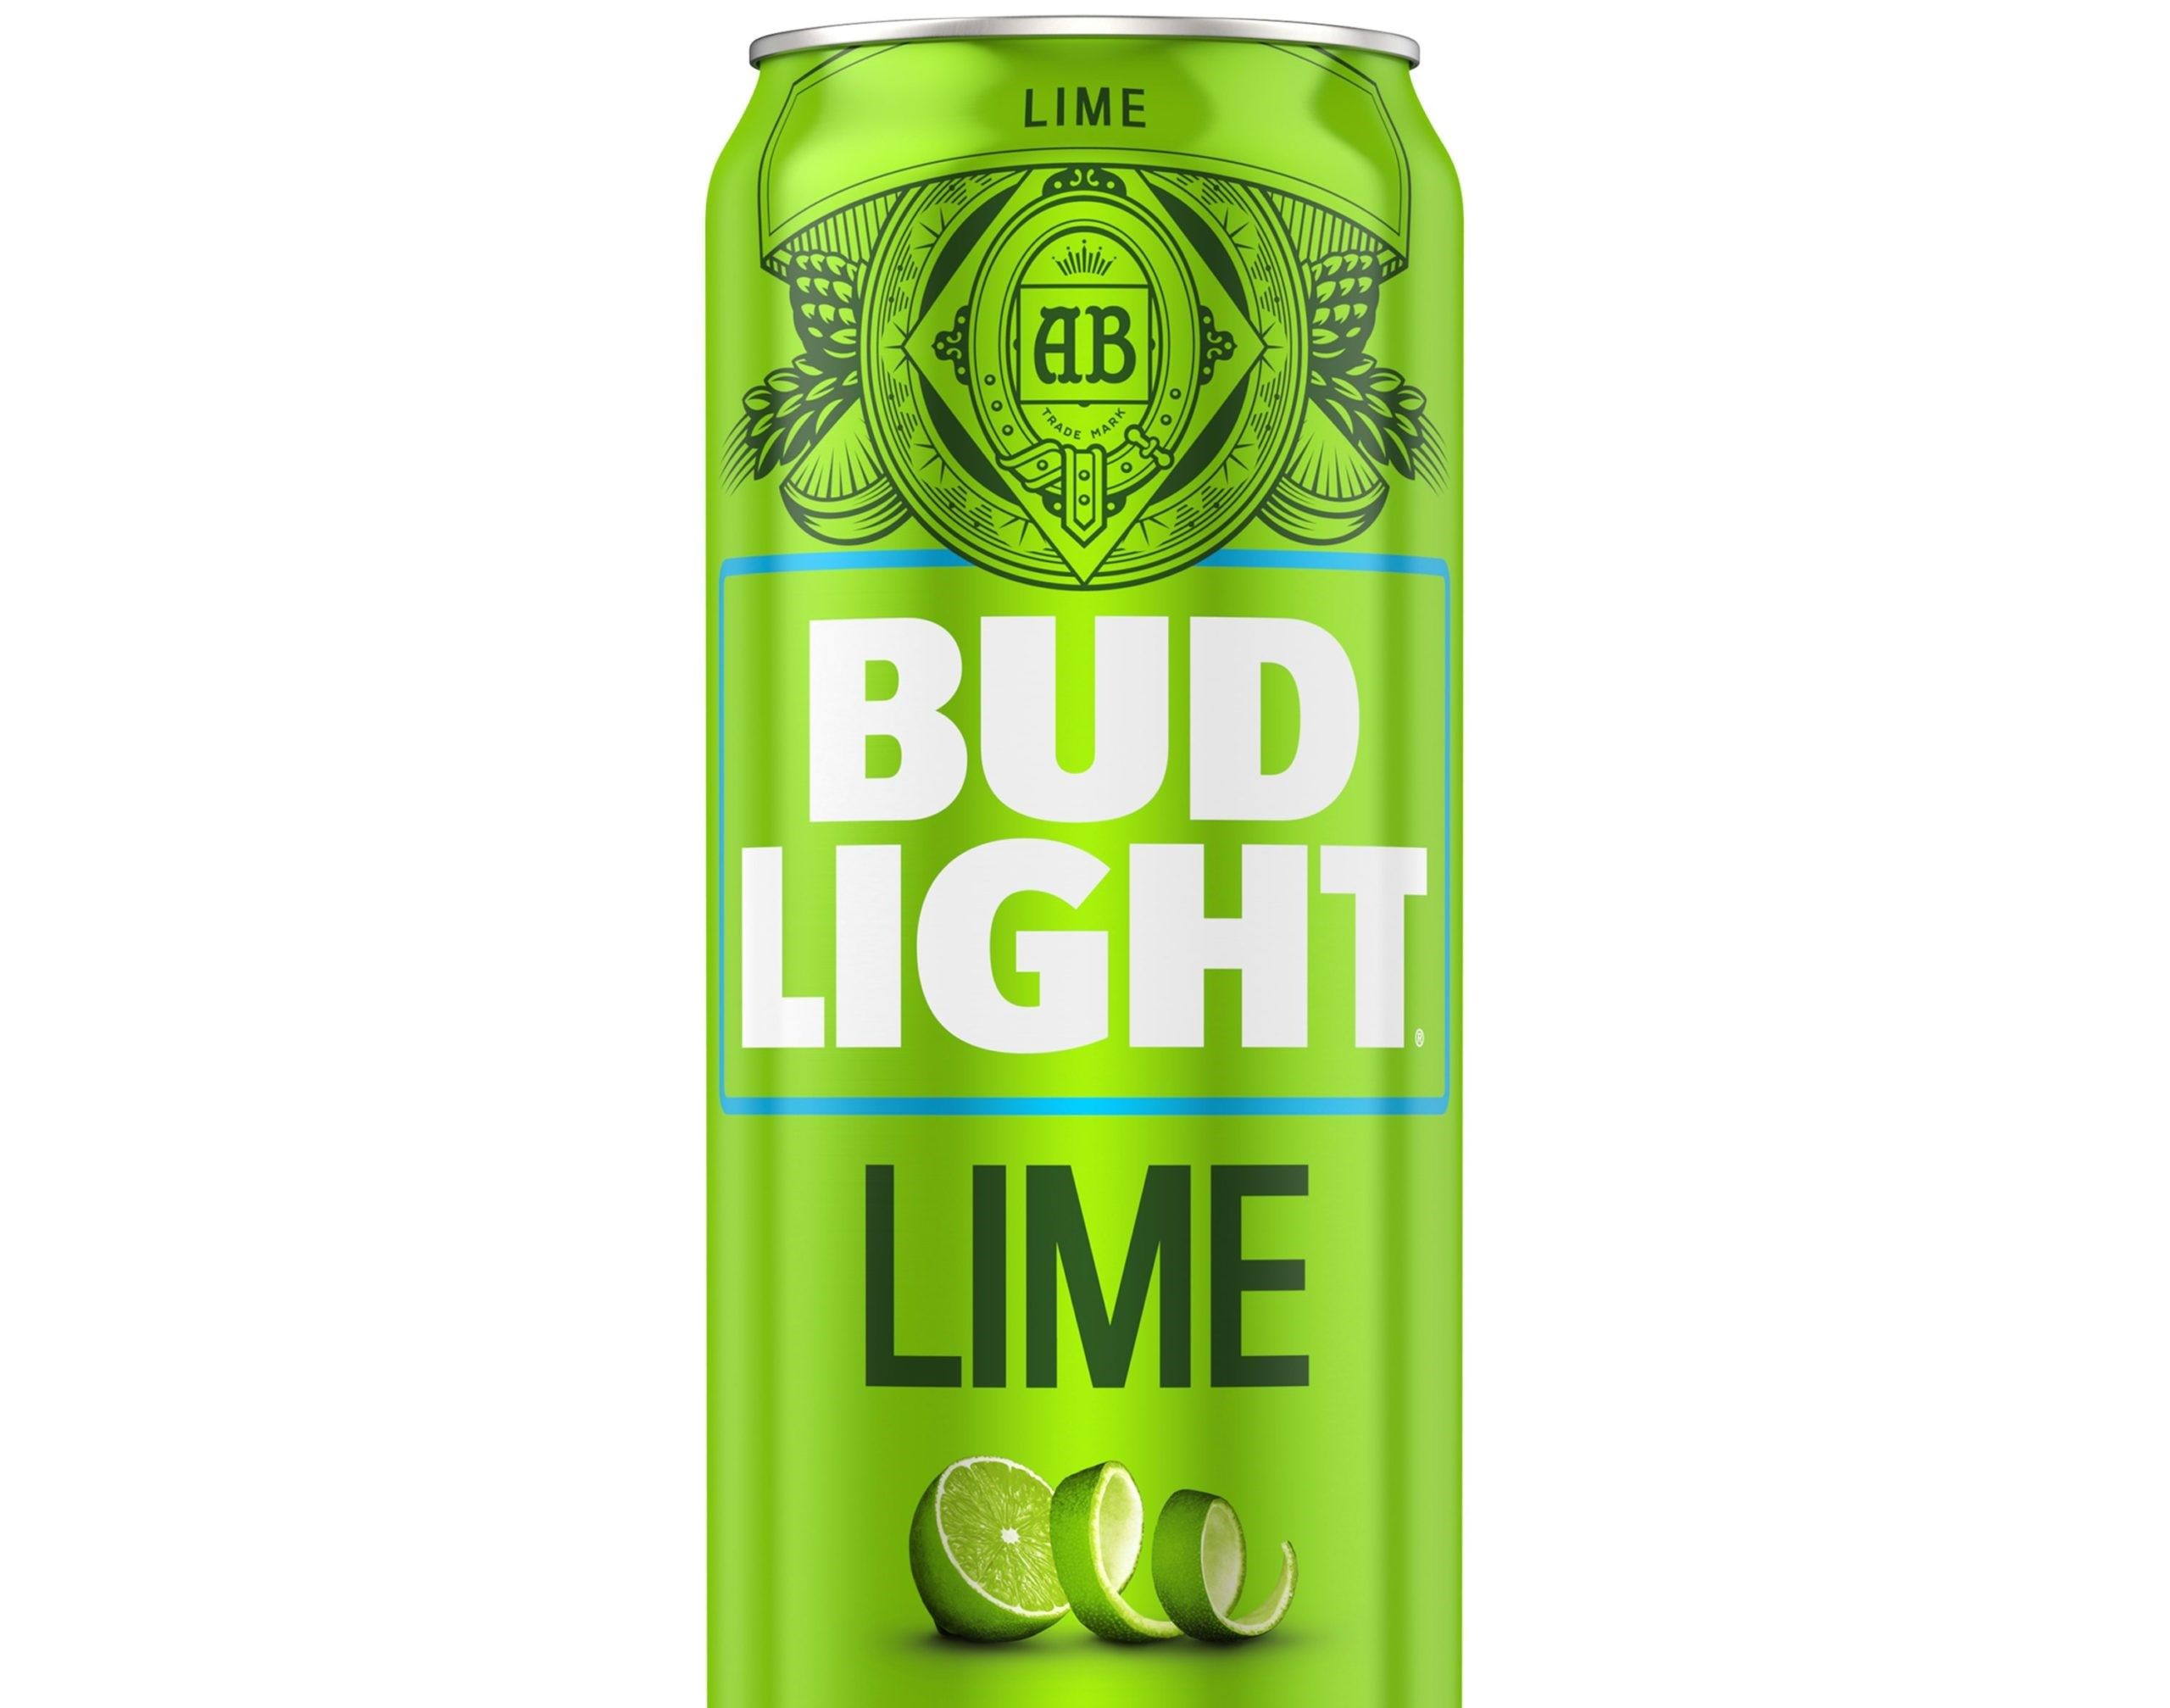 15 Bud Light Lime Nutrition Facts